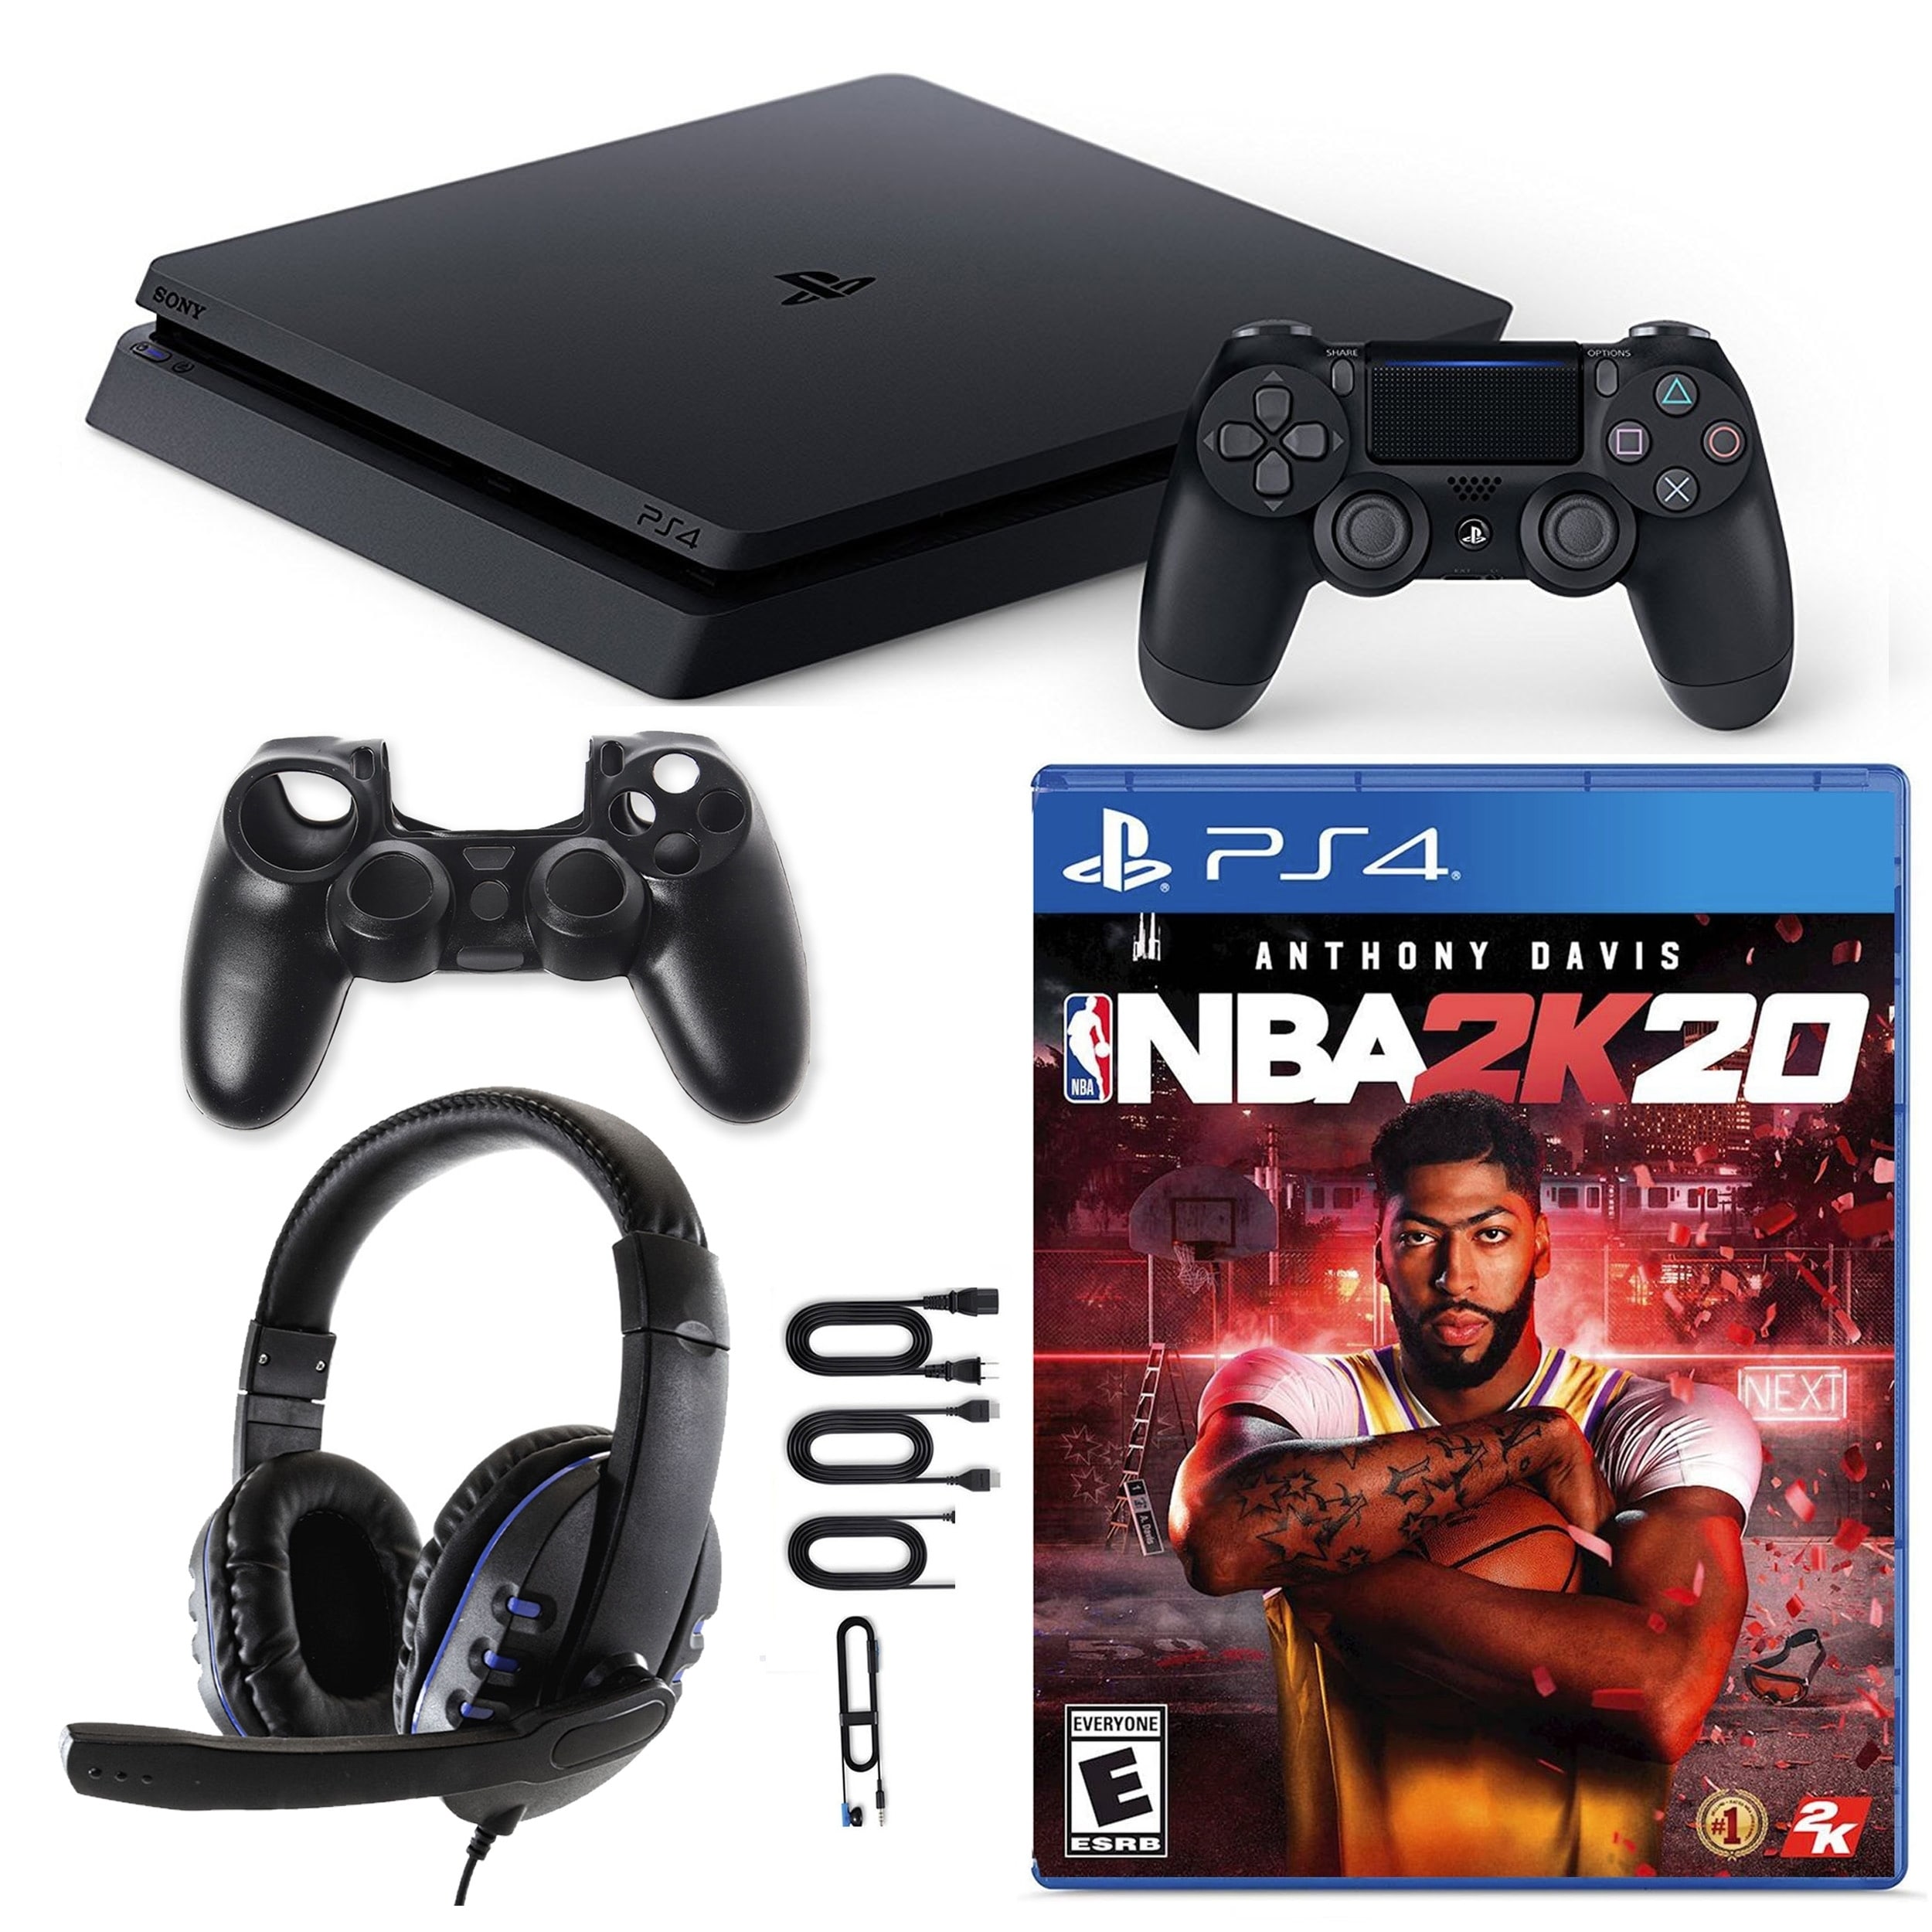 2k20 used ps4